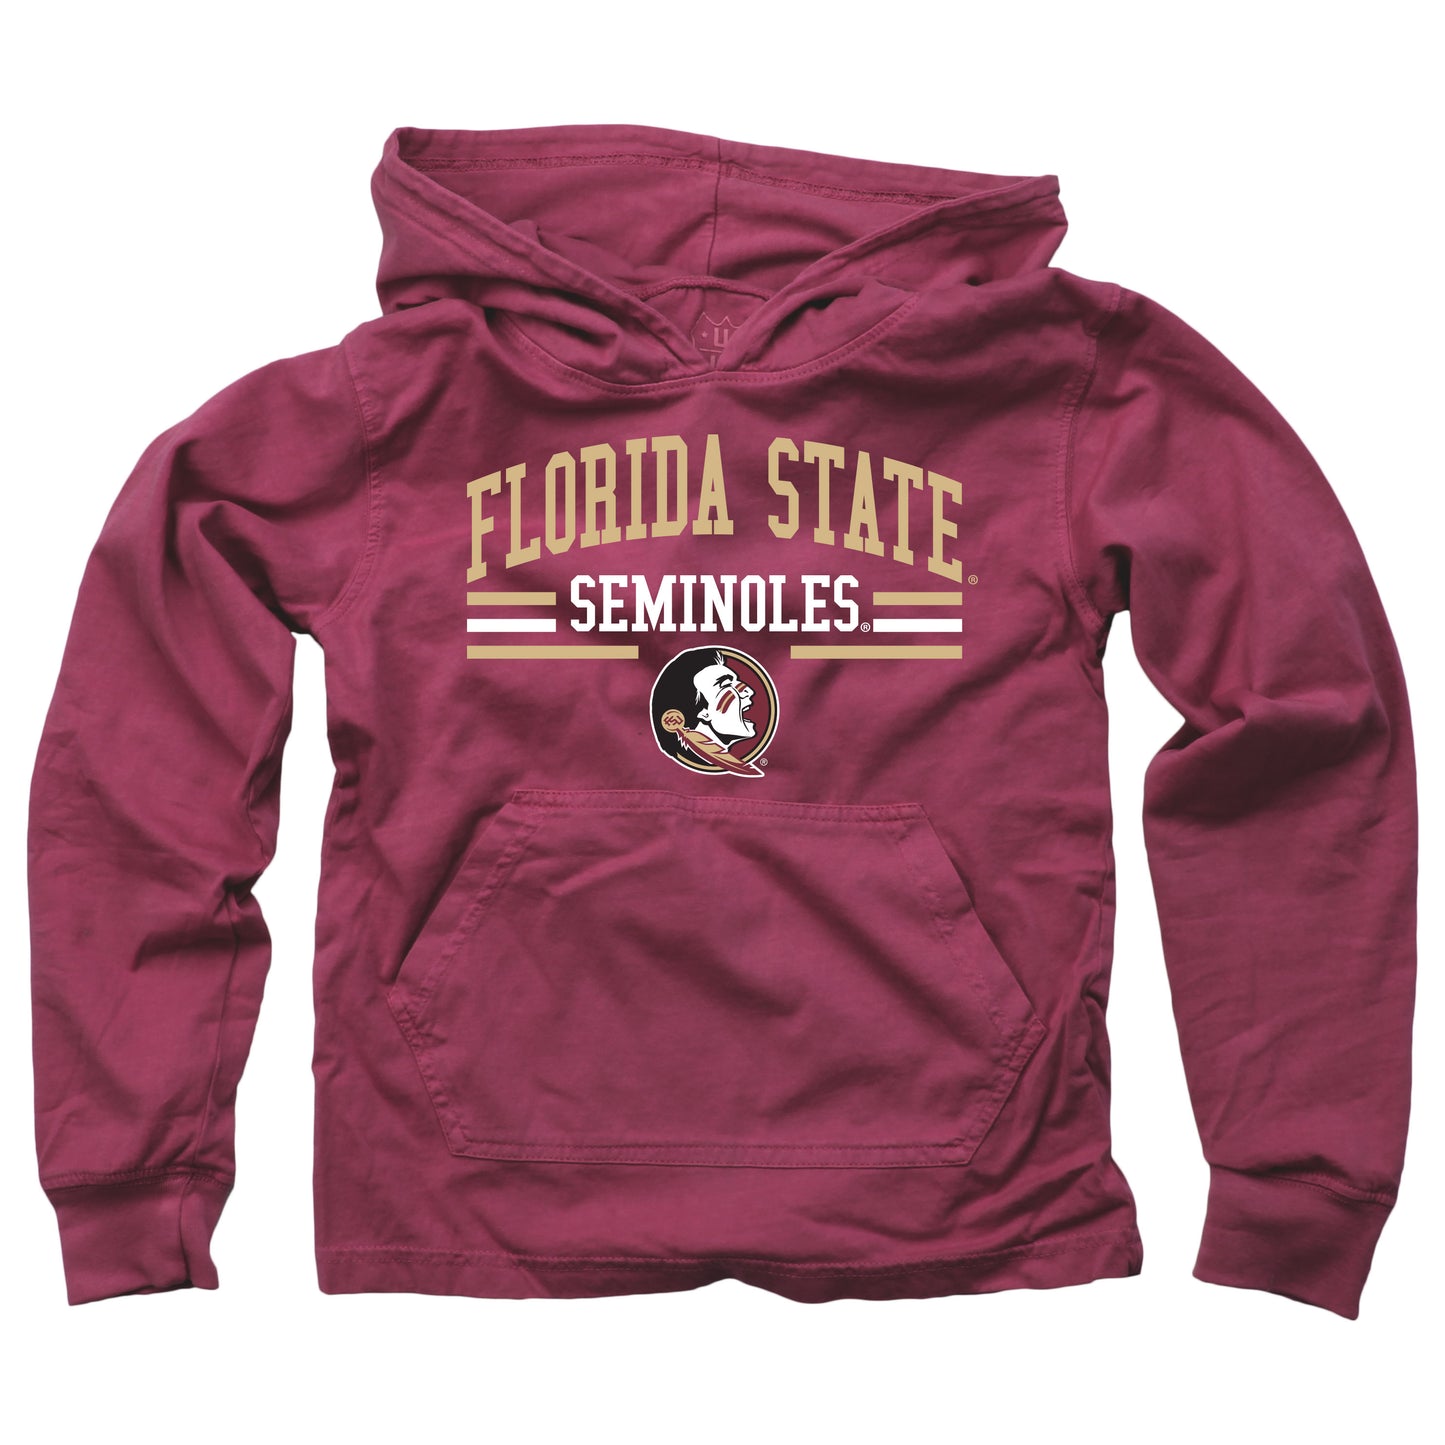 Florida State Seminoles Wes and Willy Youth and Little Boys Long Sleeve Hooded T-Shirt